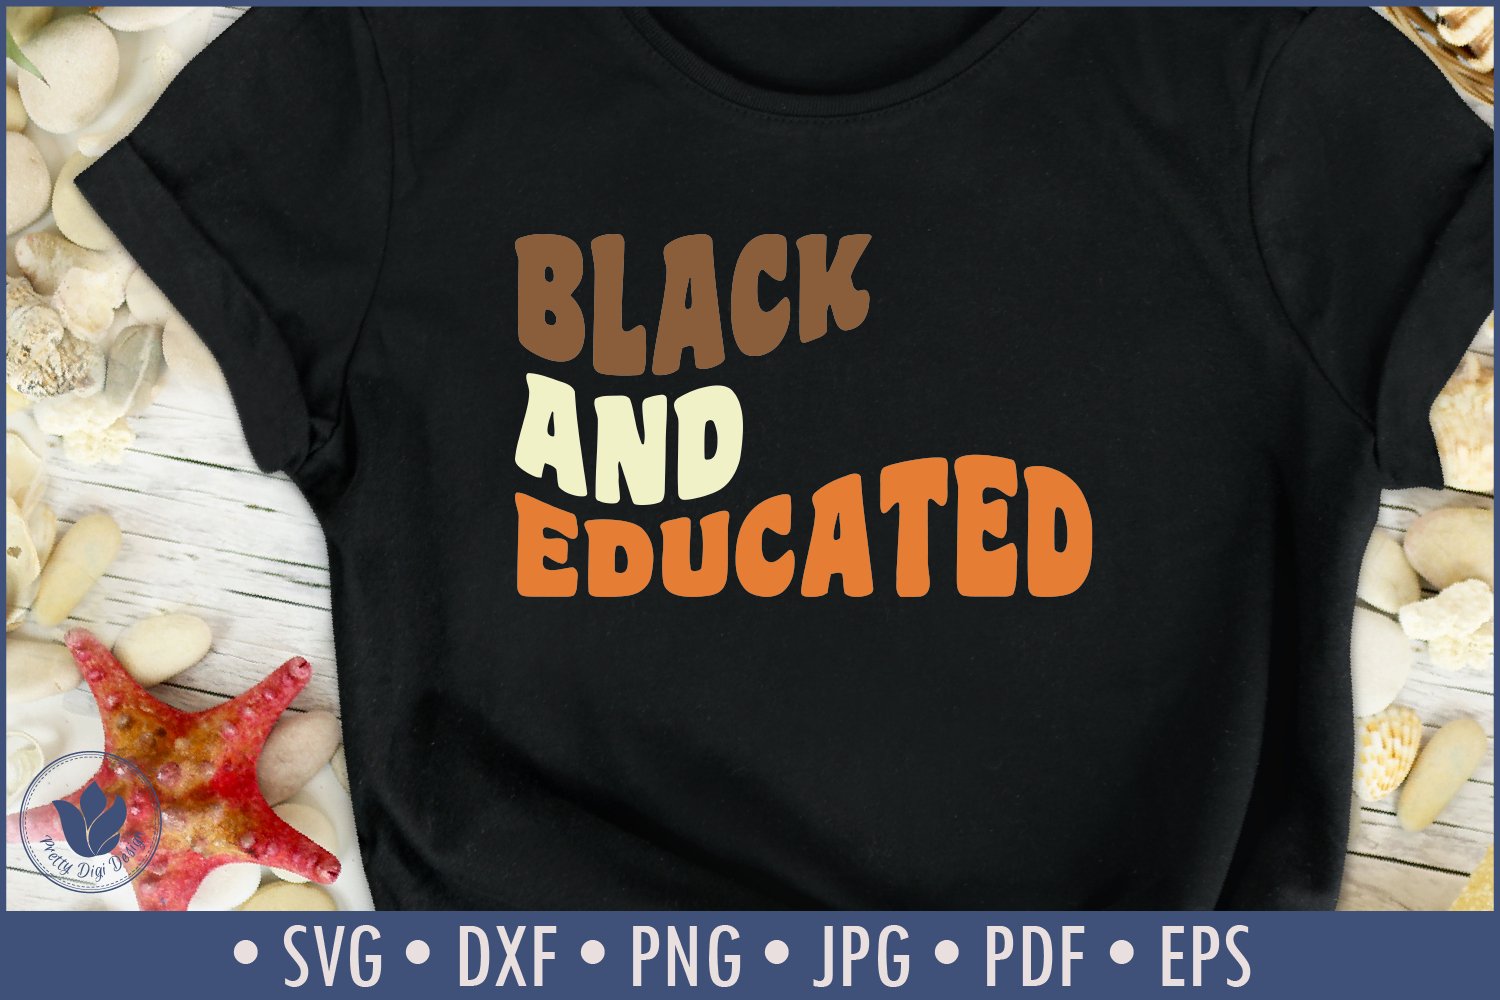 T-shirt in black with a bright print with the word "Black and Educated".